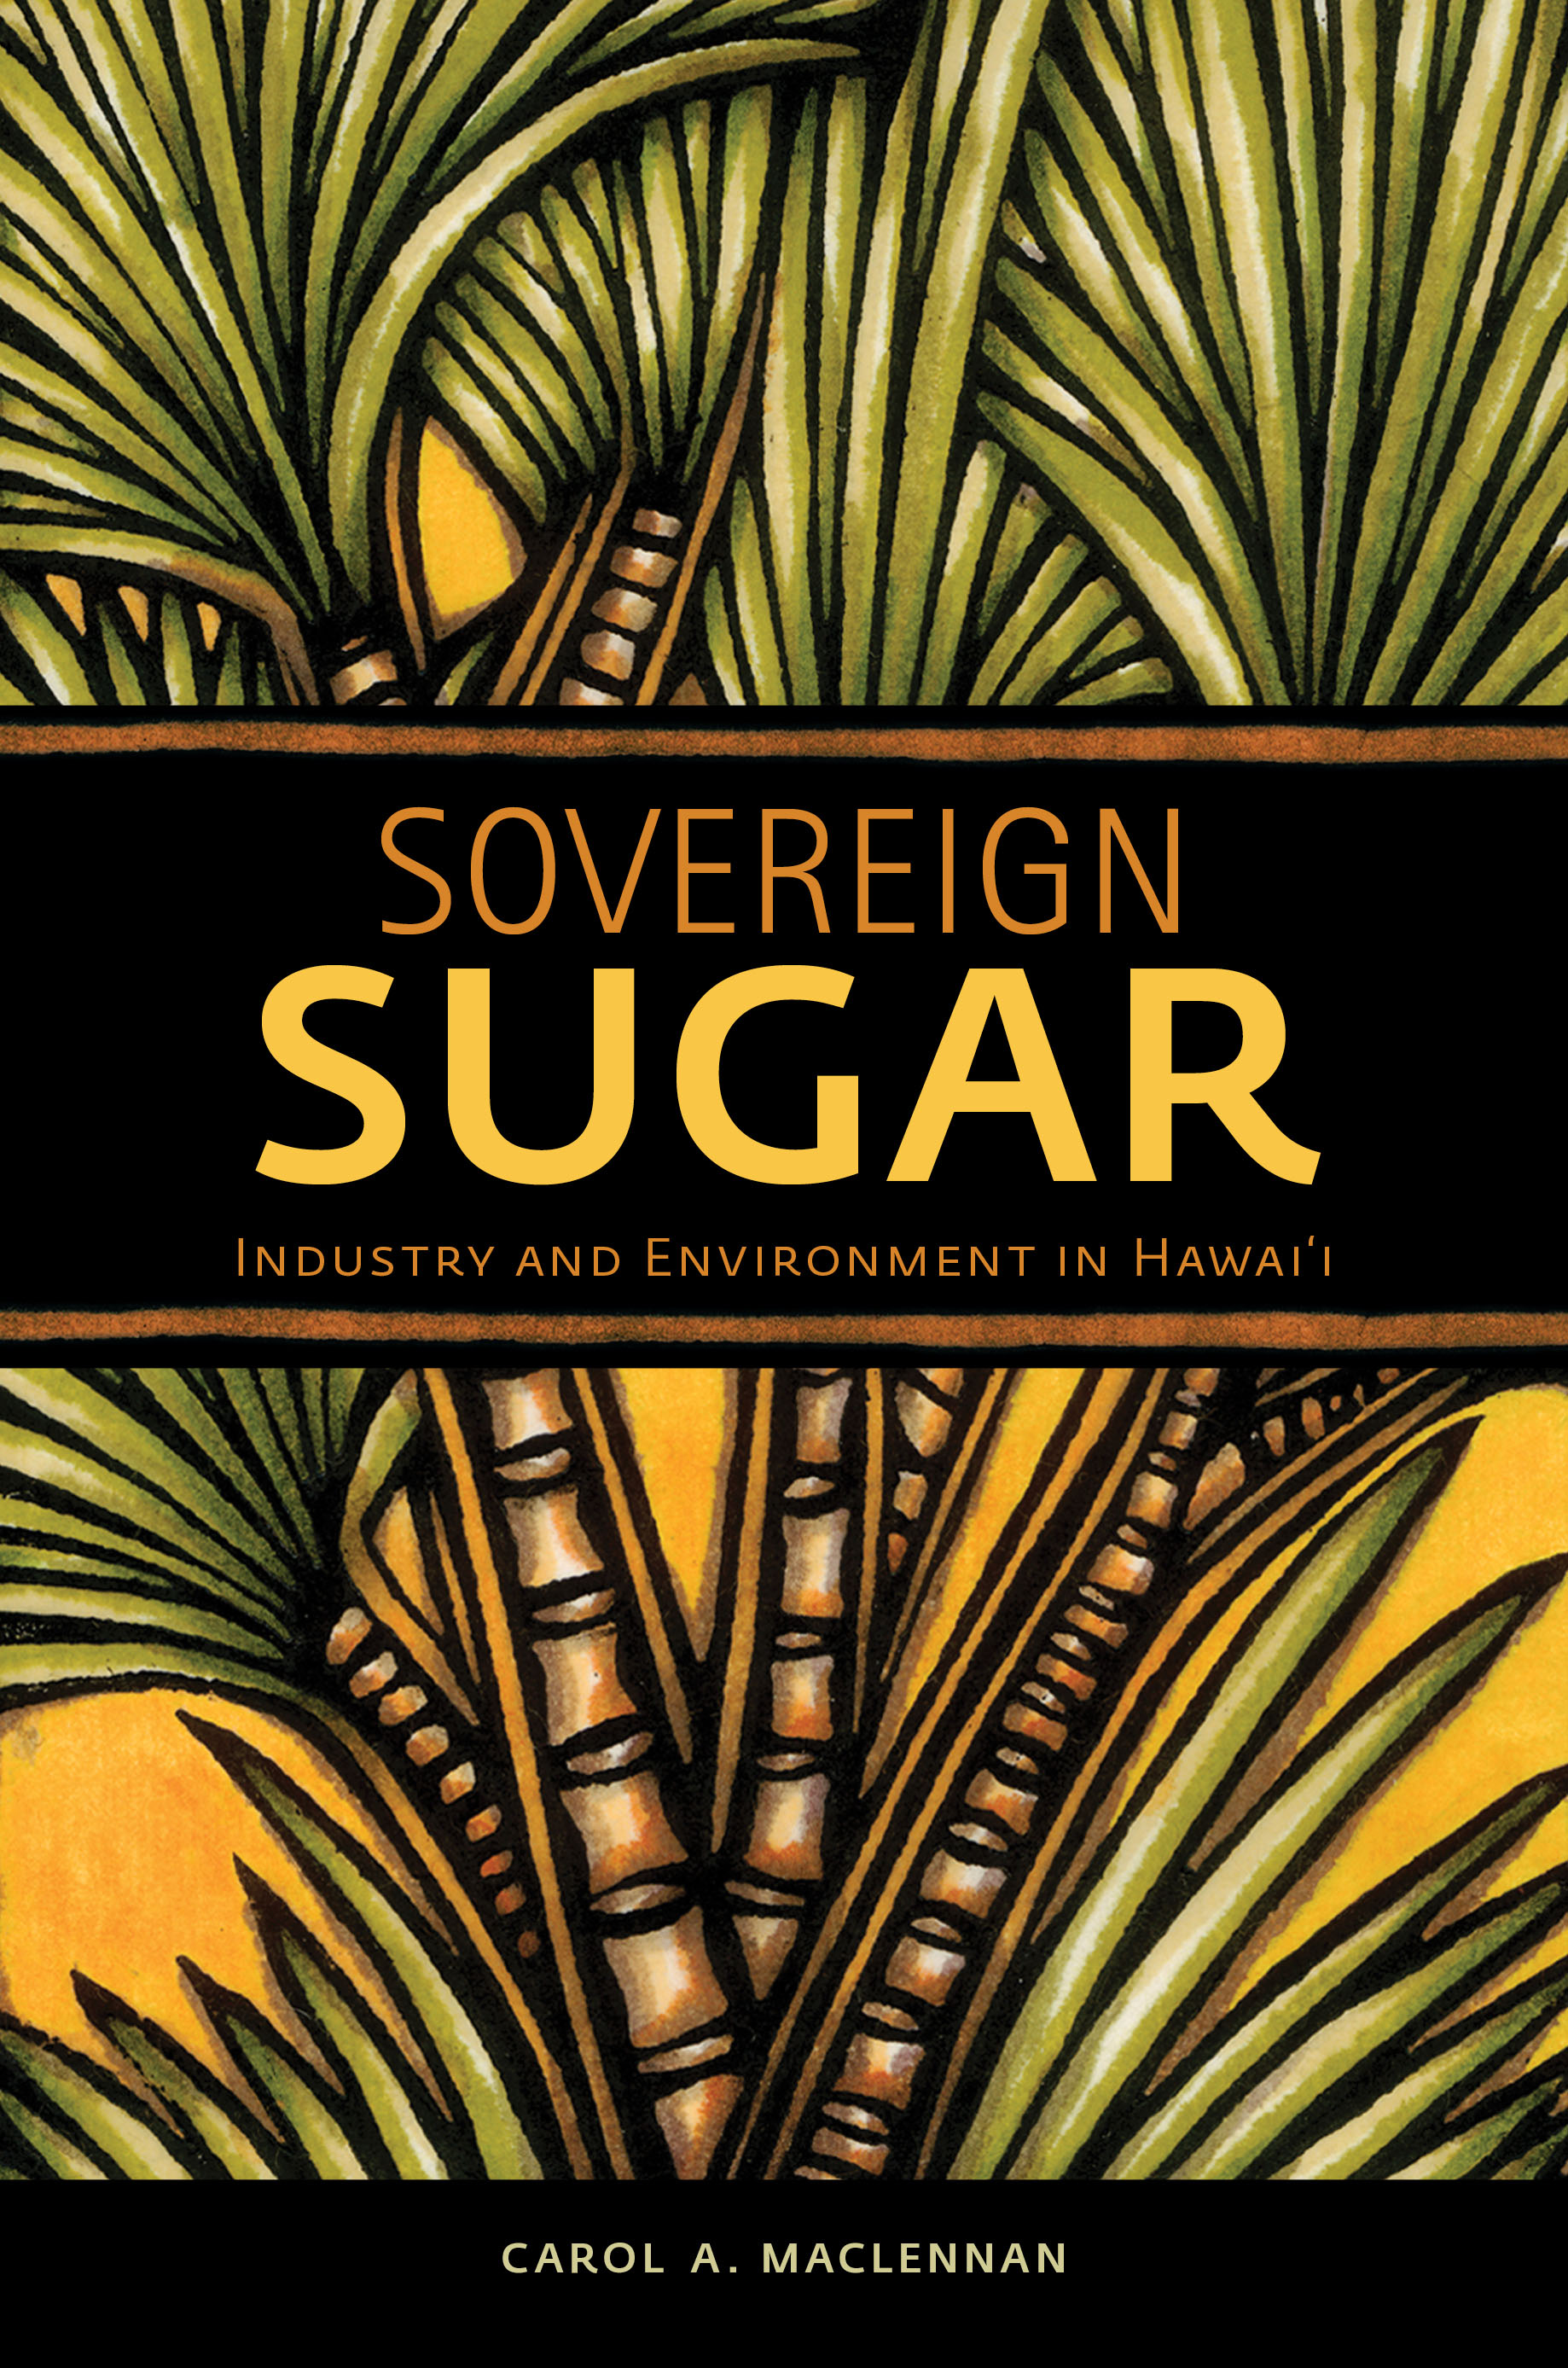 Sovereign Sugar: Industry and Environment in Hawaii